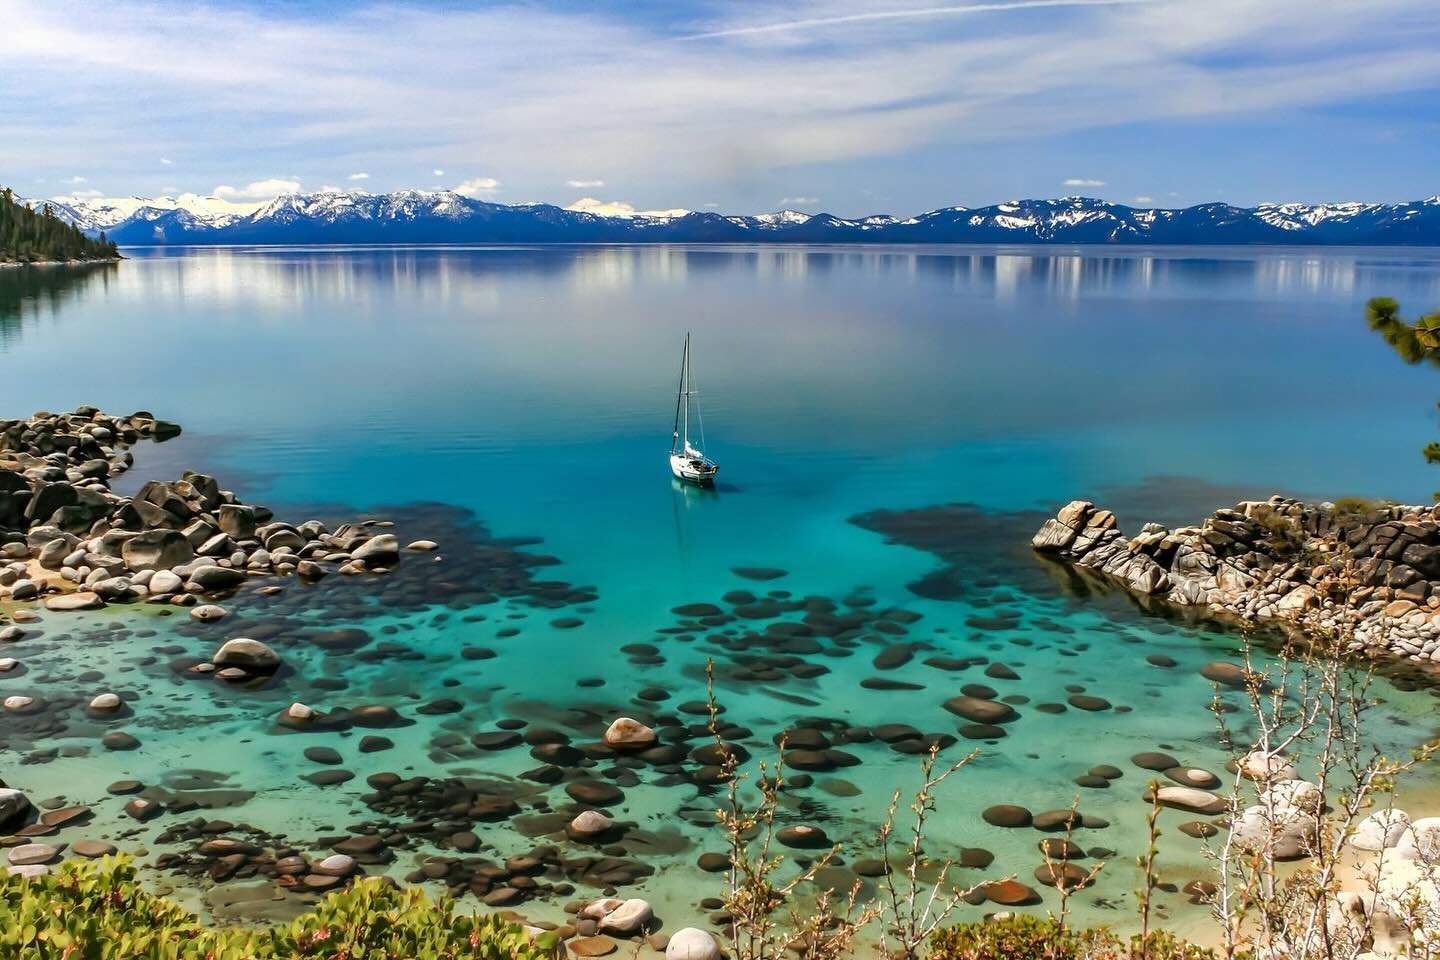 I&rsquo;m heading home from beautiful Spain, but looking forward to summer travel. Check out my latest post on stunning Lake Tahoe and all the exciting things to see and do. 

Link in bio.

#SickGirlTravels #disabledtravel #traveladdict #accessibletr